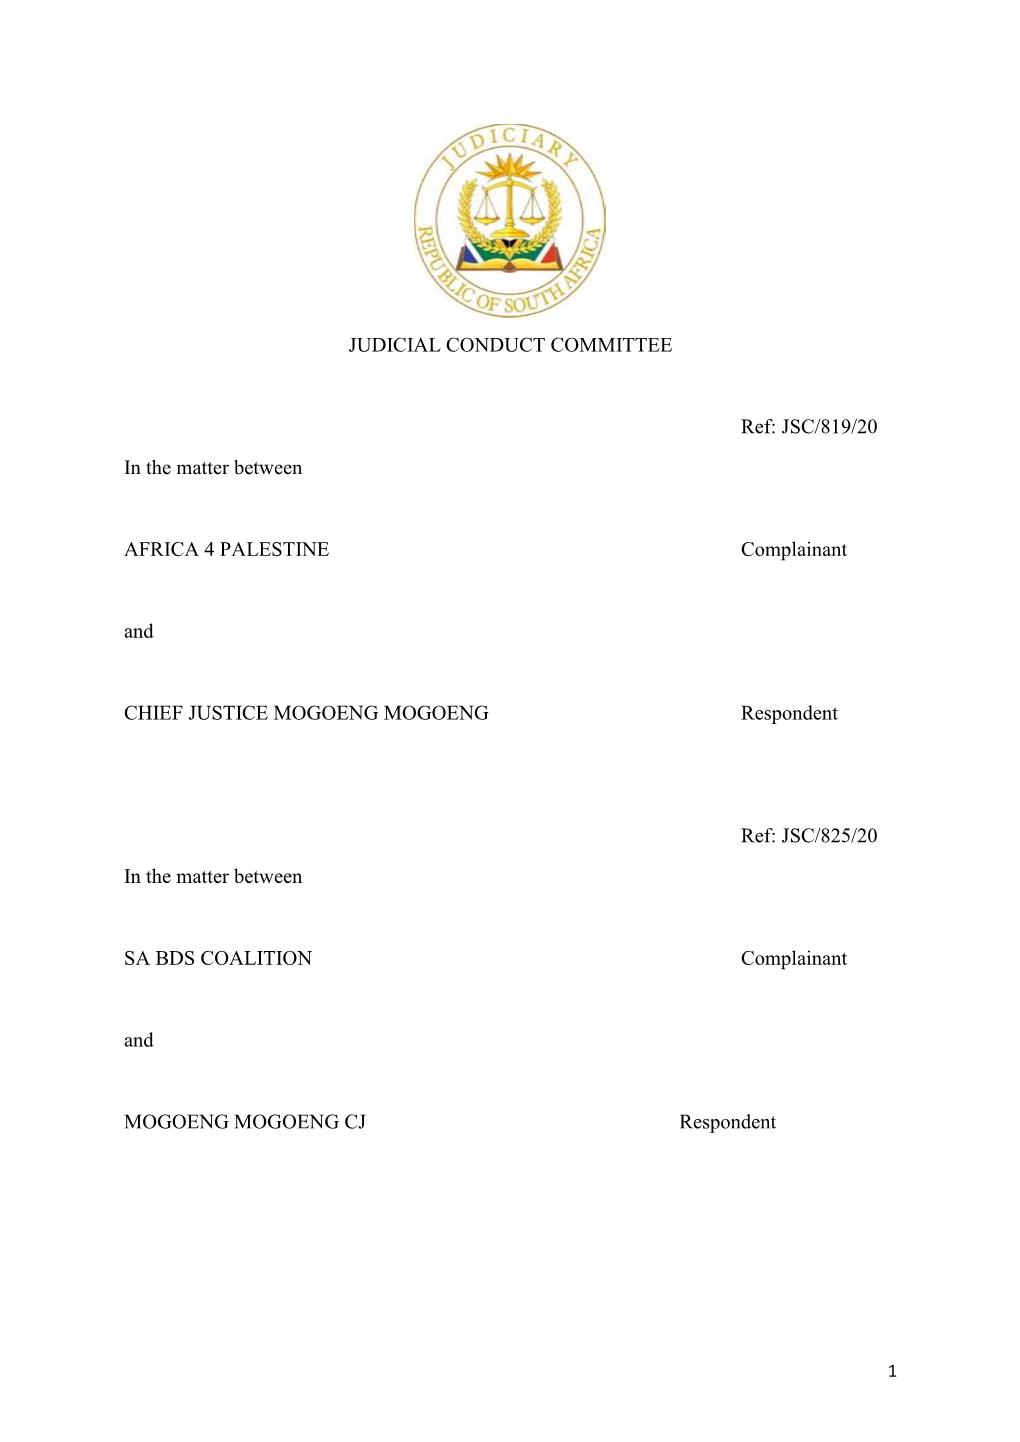 JUDICIAL CONDUCT COMMITTEE Ref: JSC/819/20 in the Matter